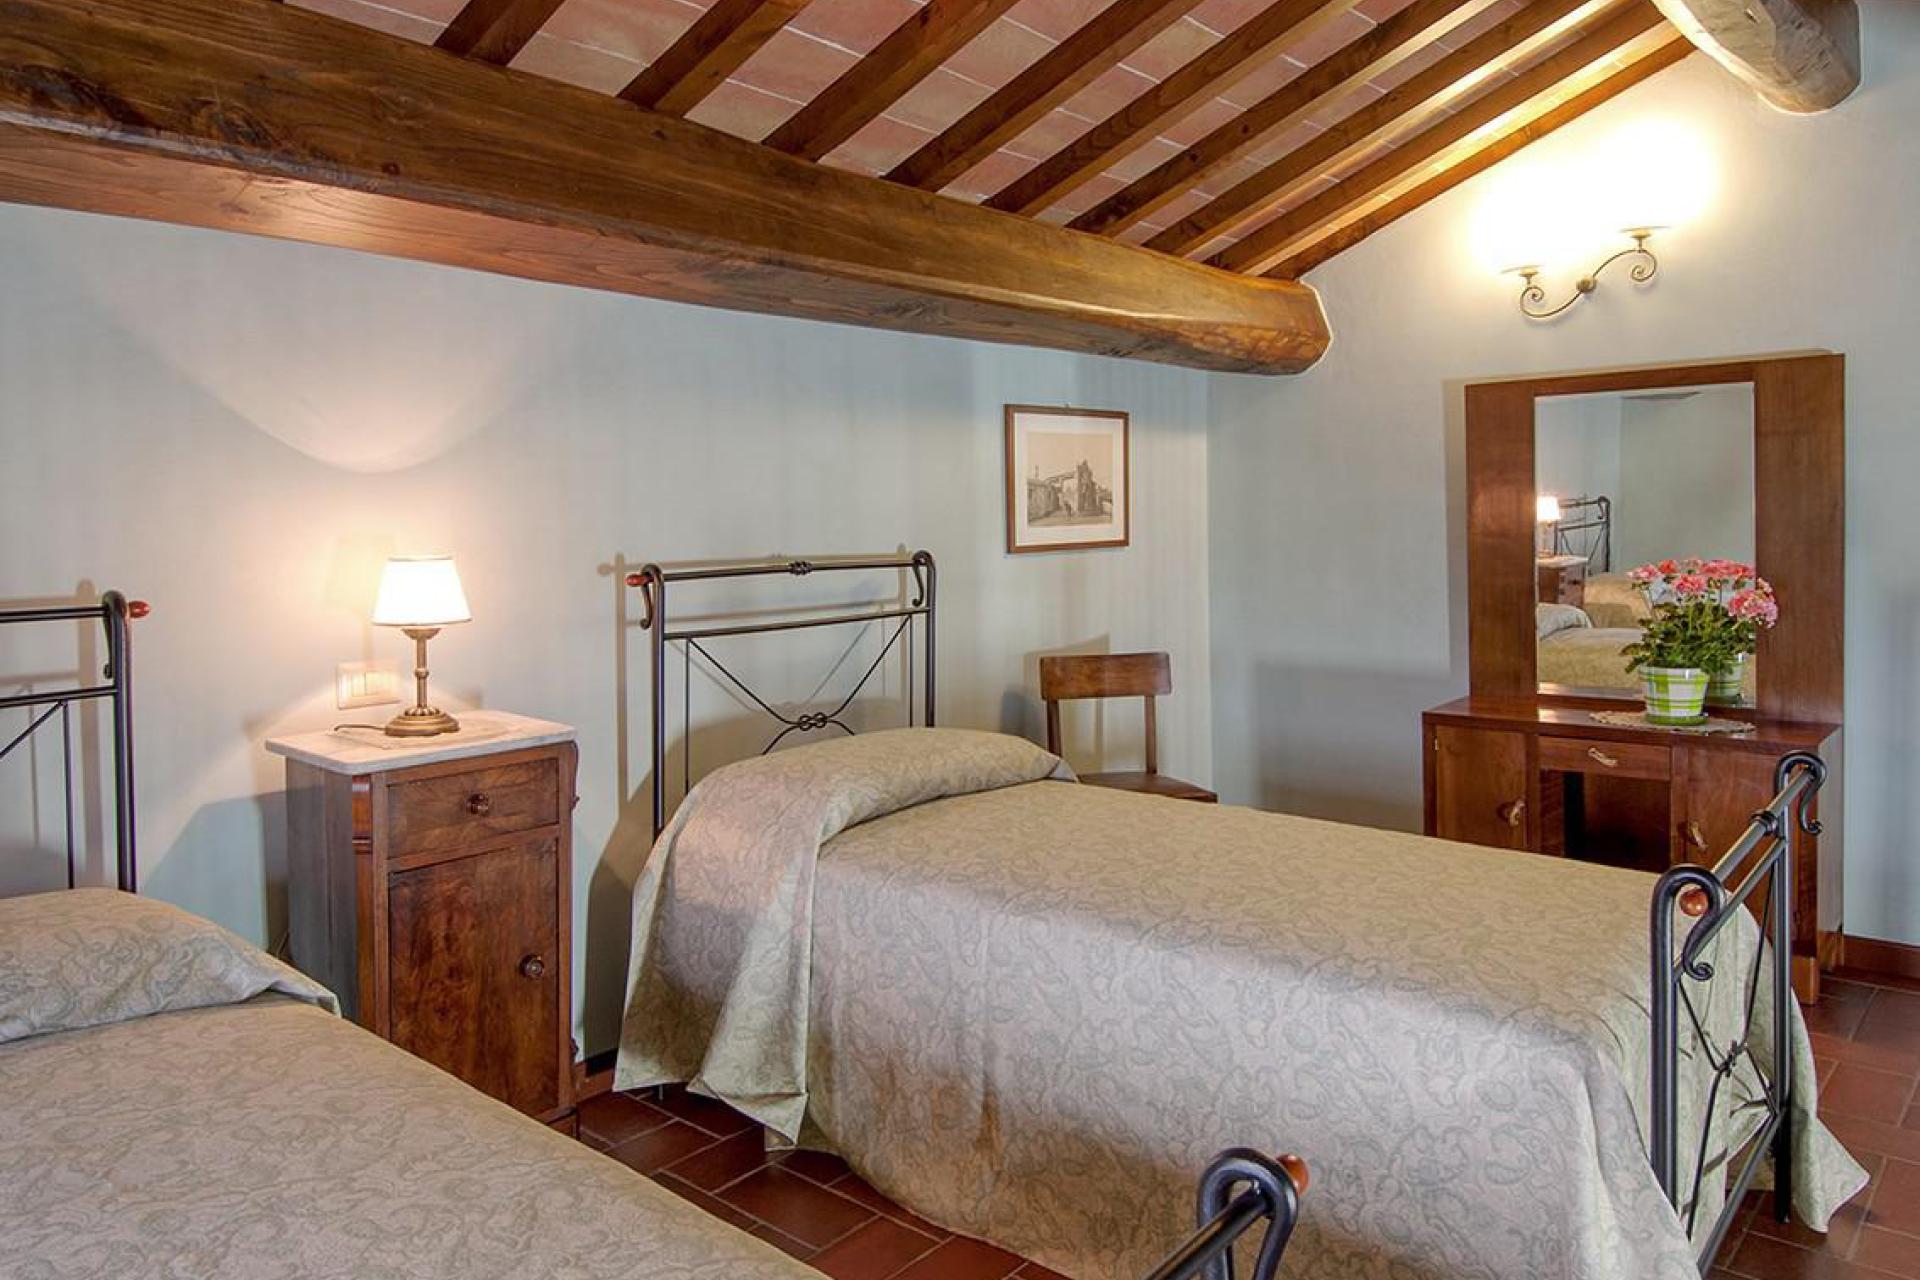 Agriturismo Tuscany Lovely agriturismo in Tuscany for 4 families